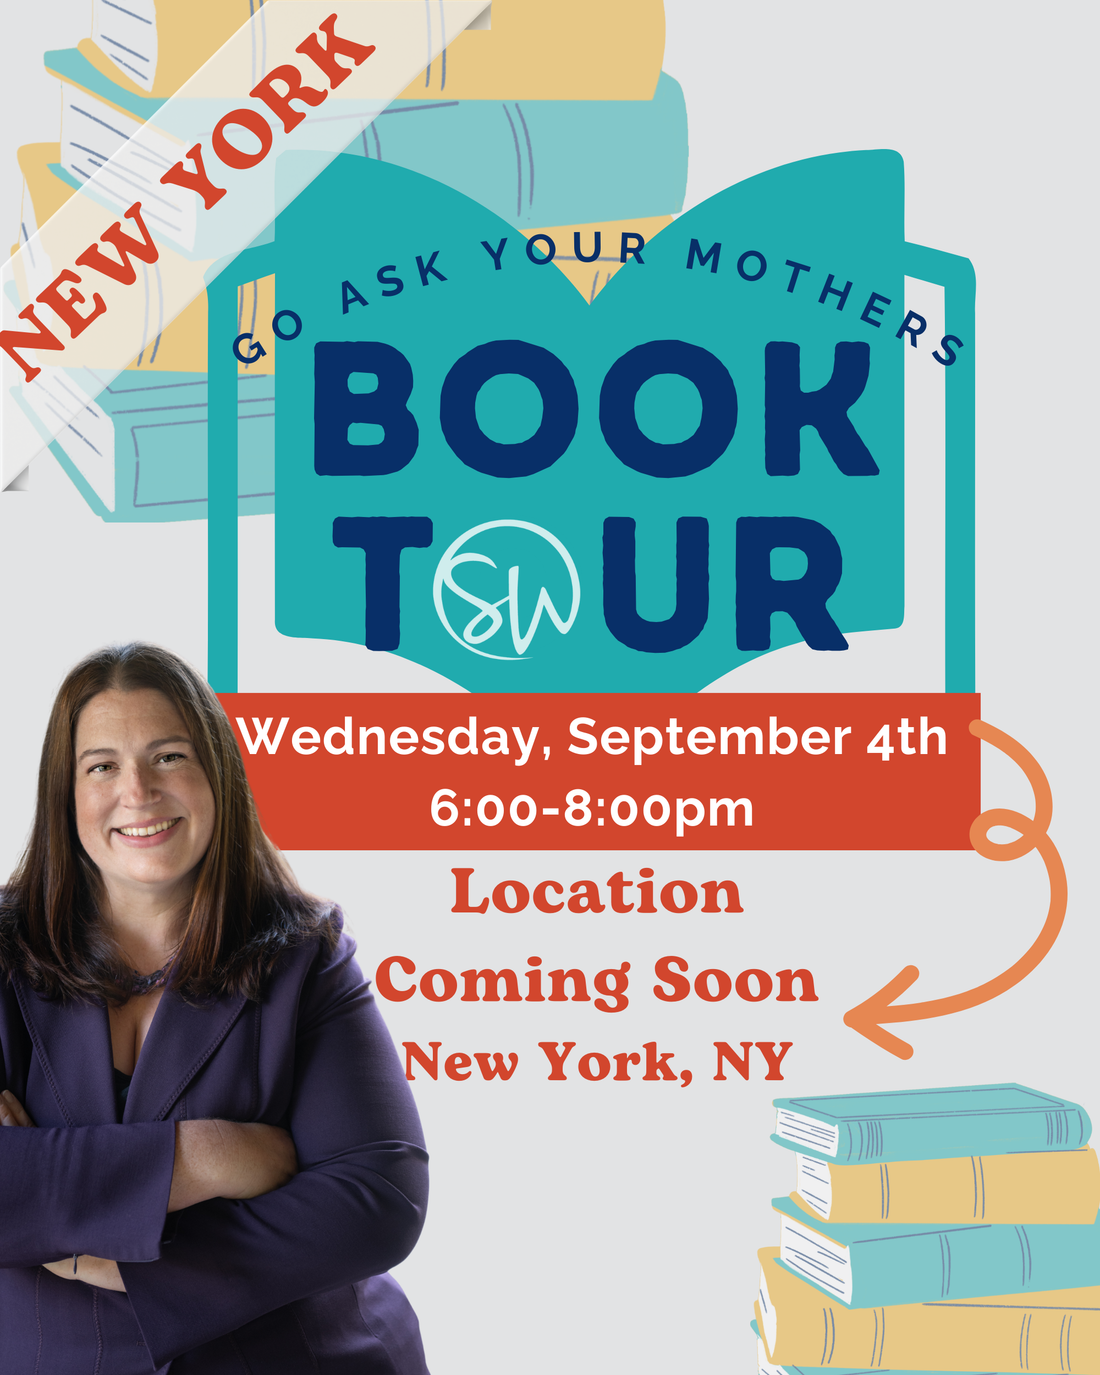 New York, NY - September 4th @ 6pm Book Tour Event - FREE Ticket